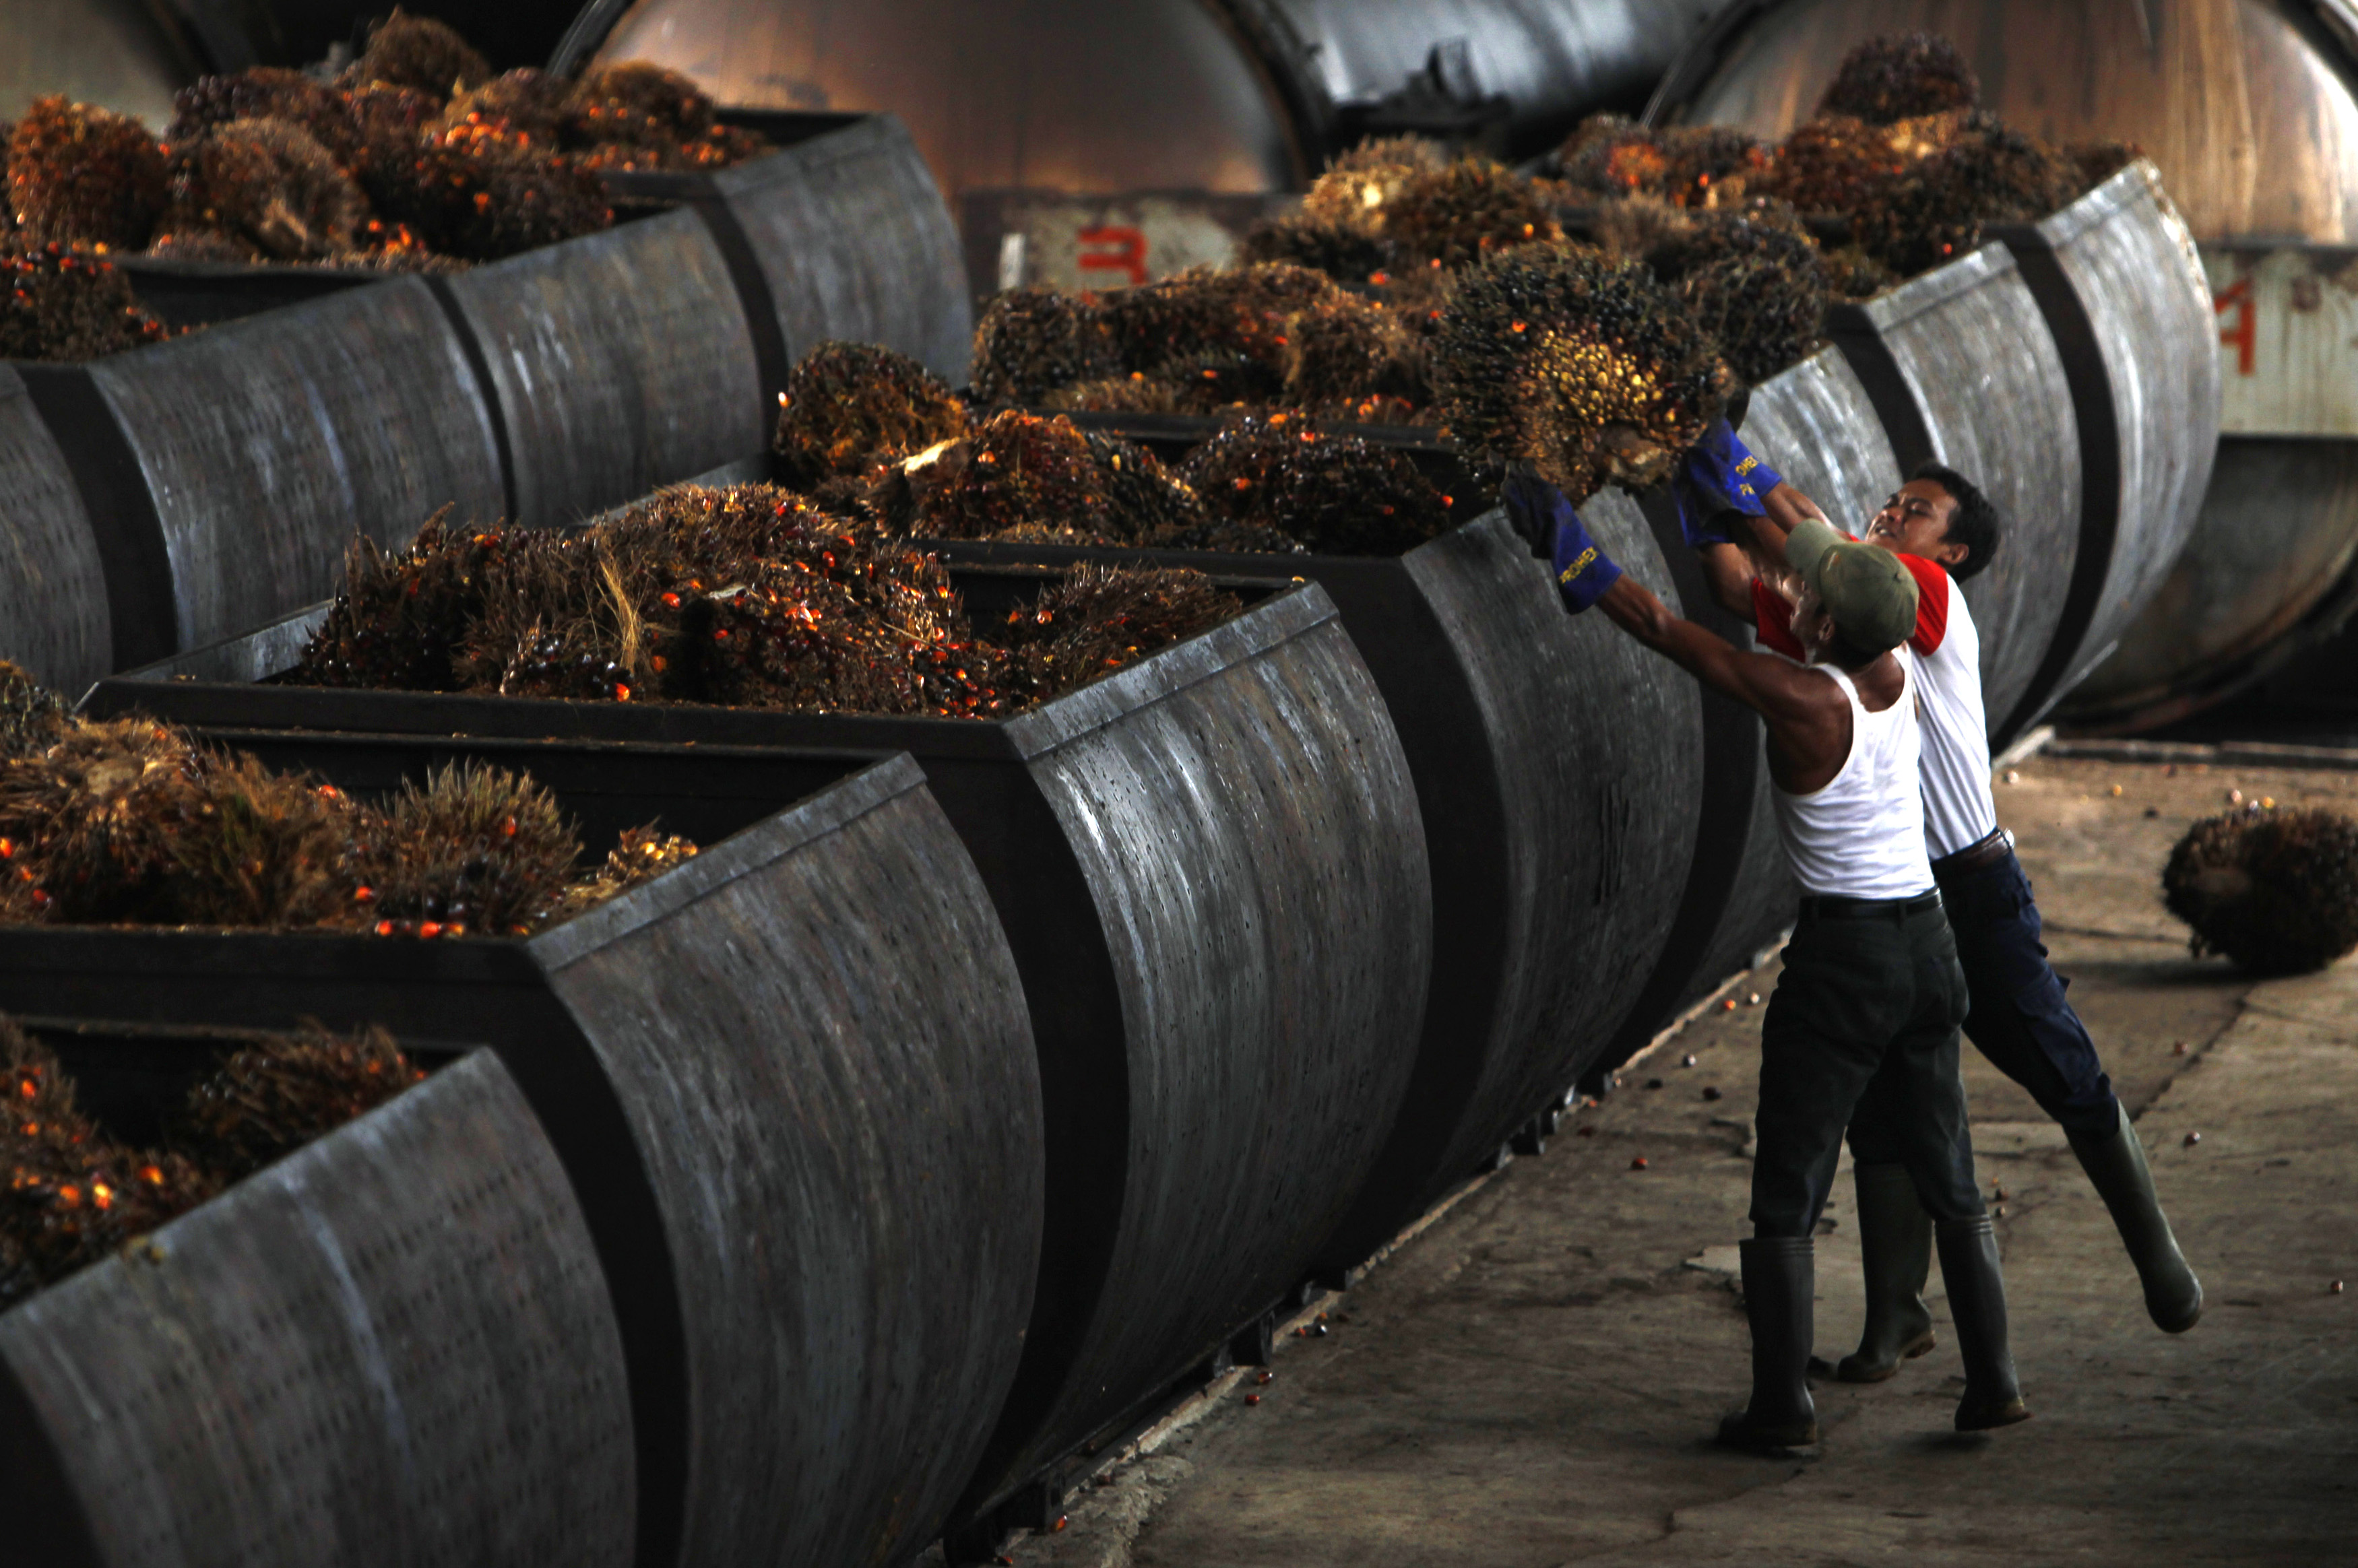 Workers carry oil palm fruits to containers on their way into processing plants at  PT Perkebunan Nusantara VIII, a state-owned palm oil factory in Malingping